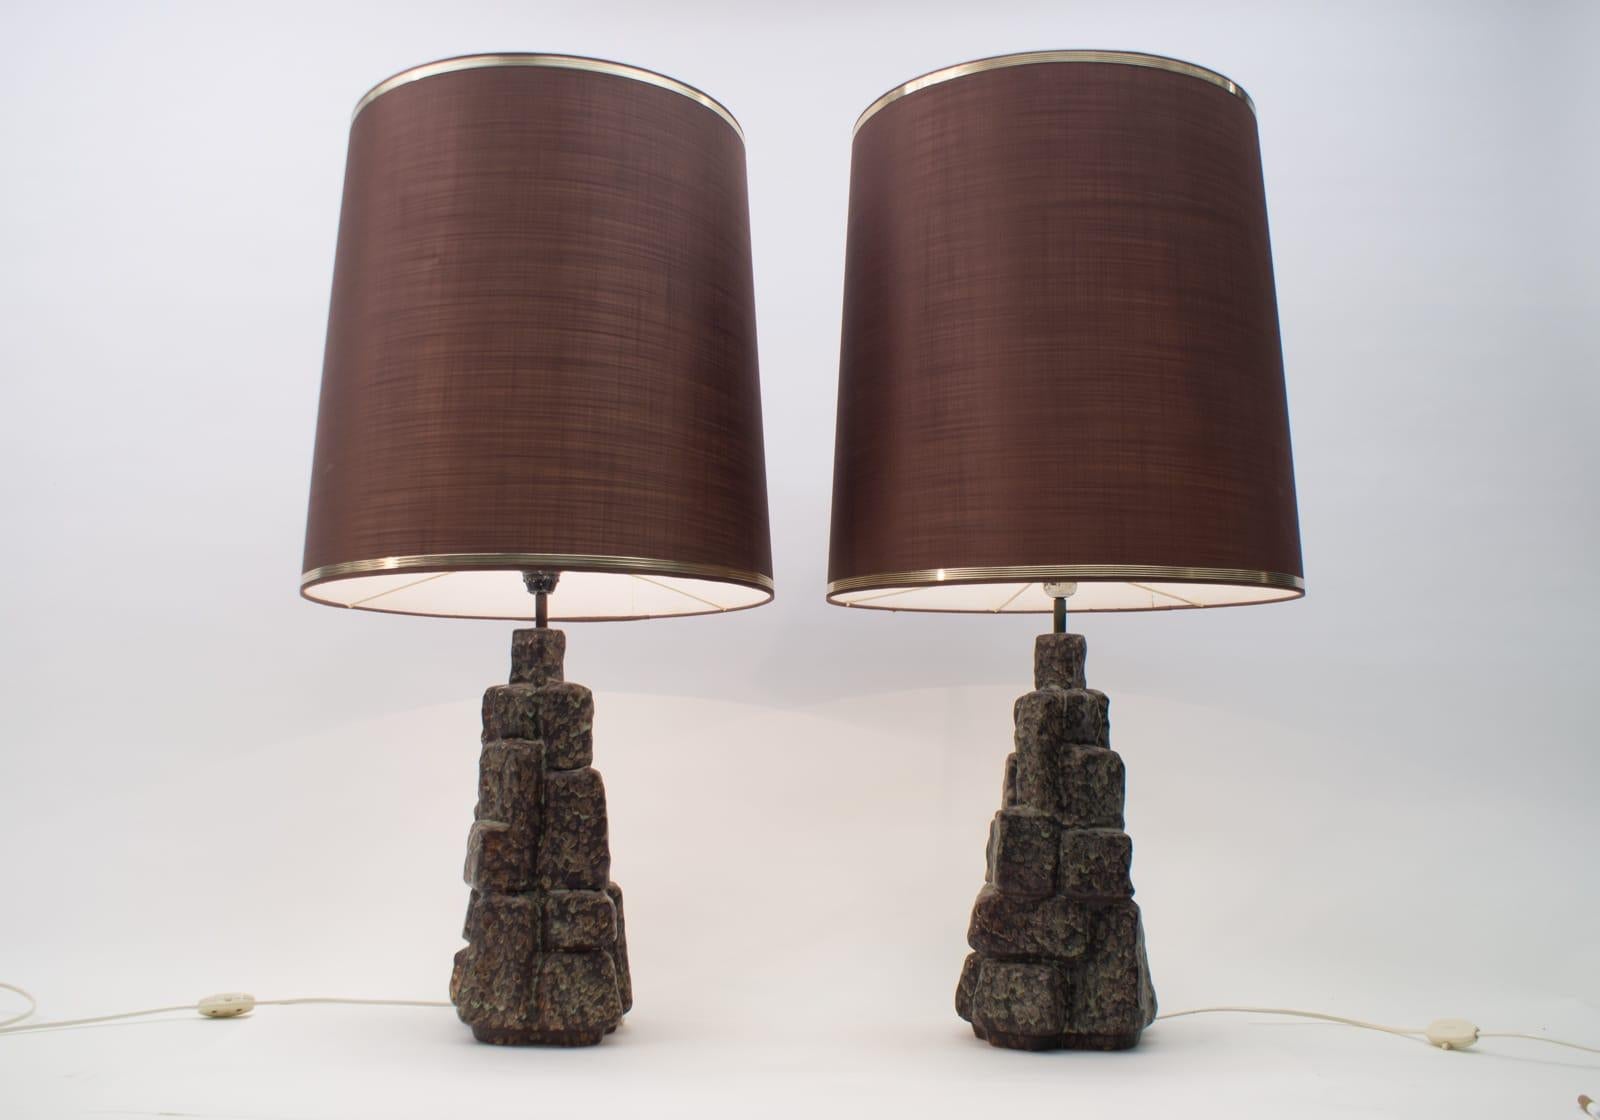 The lamps with the shades shown here are 94 cm high, the lamp base alone measures 52 cm.

The lamp is offered without the lampshade.

There is a European plug on it. You may need probably an adapter for 110 Volt.